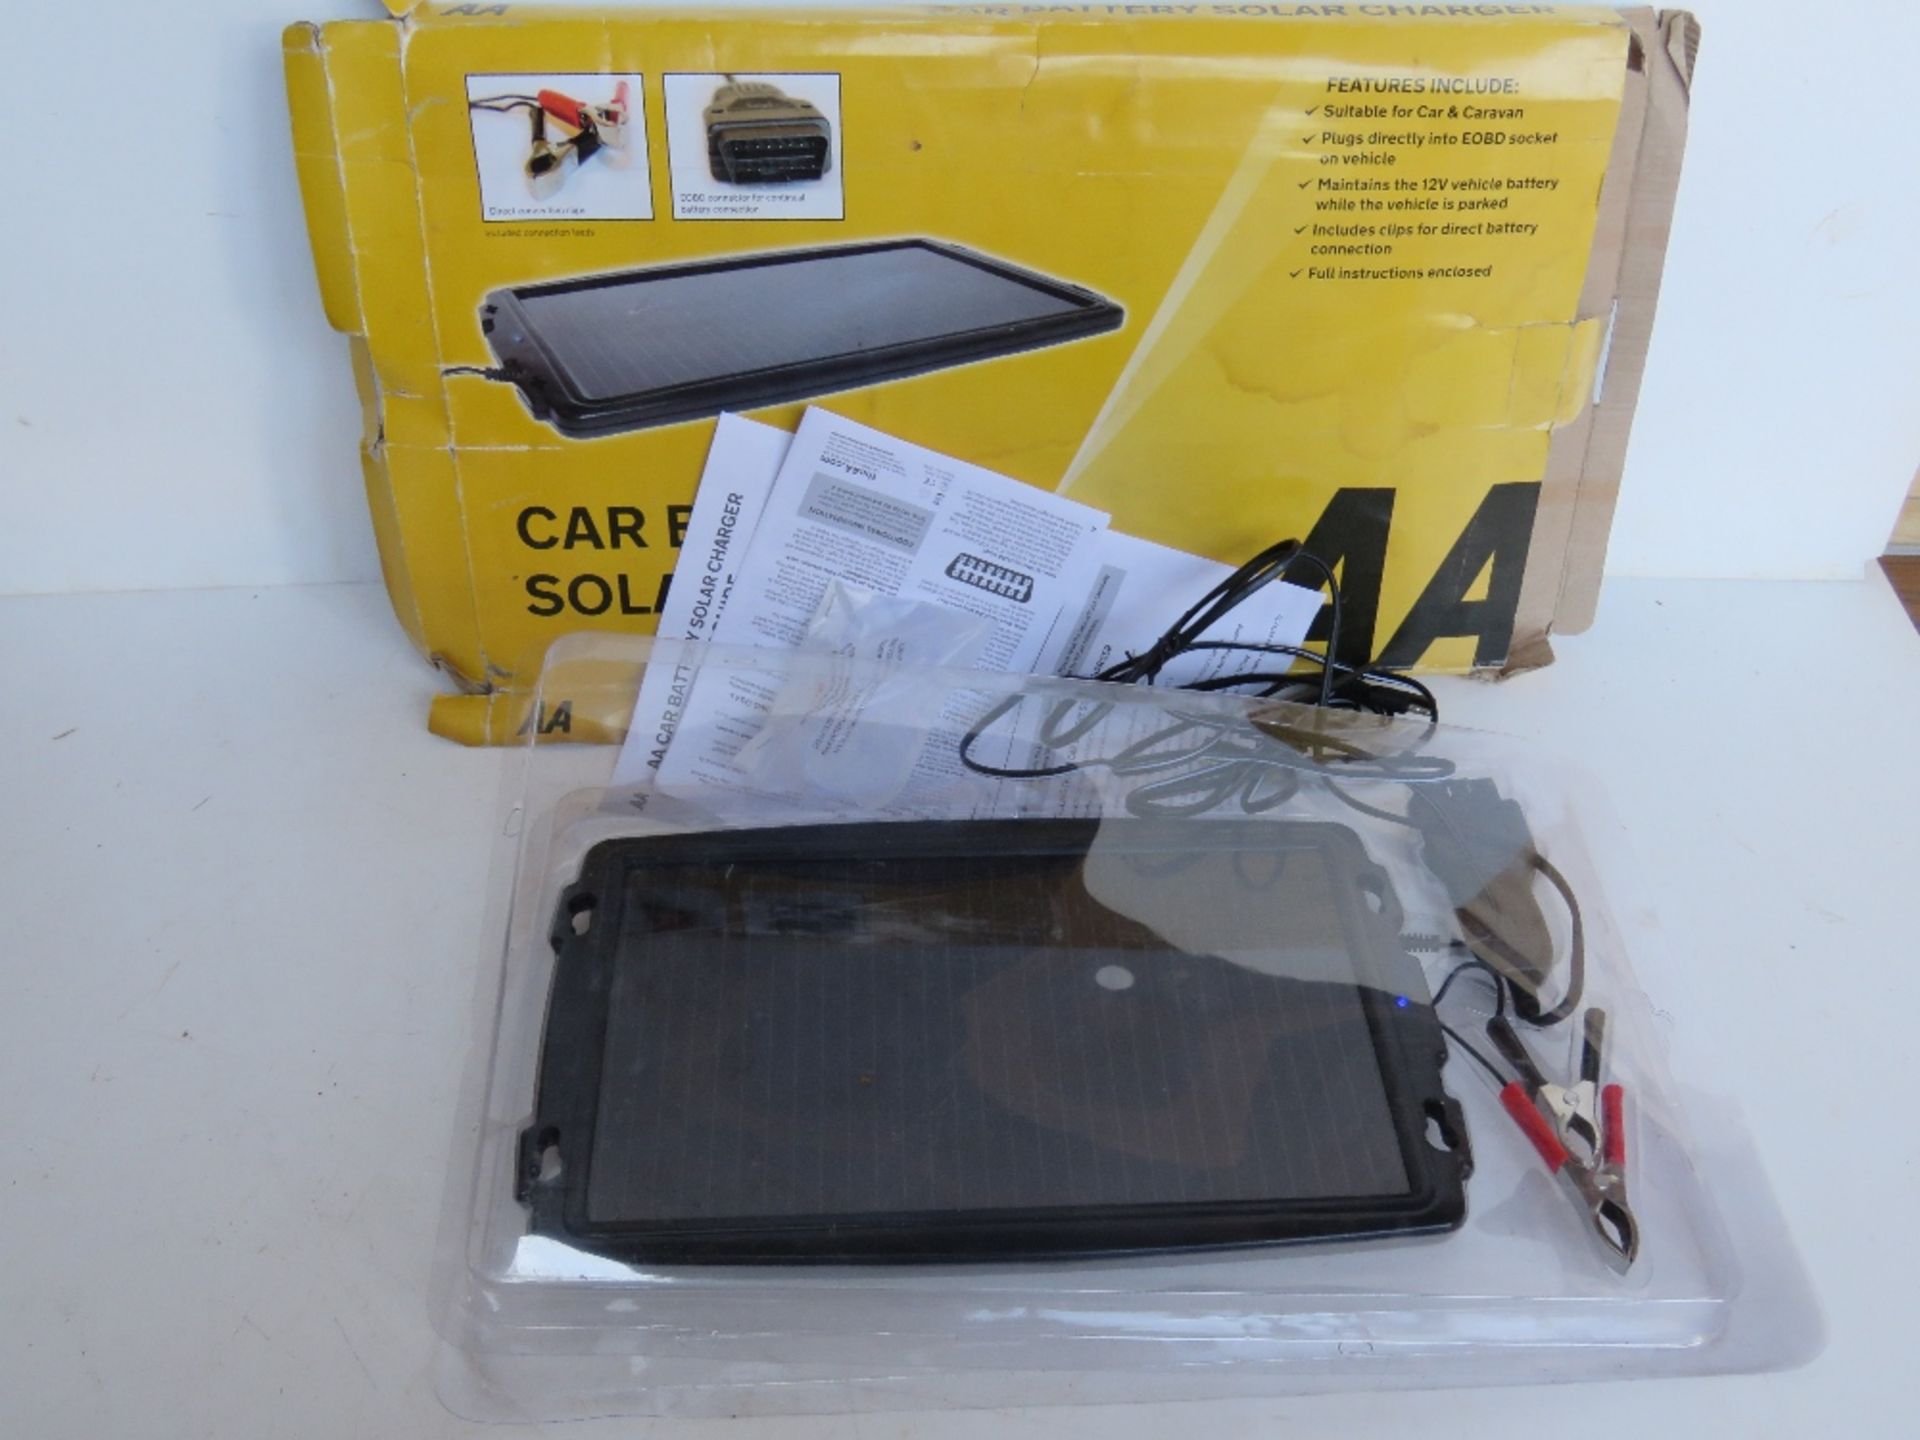 An AA car battery solar charger. In box, box a/f.